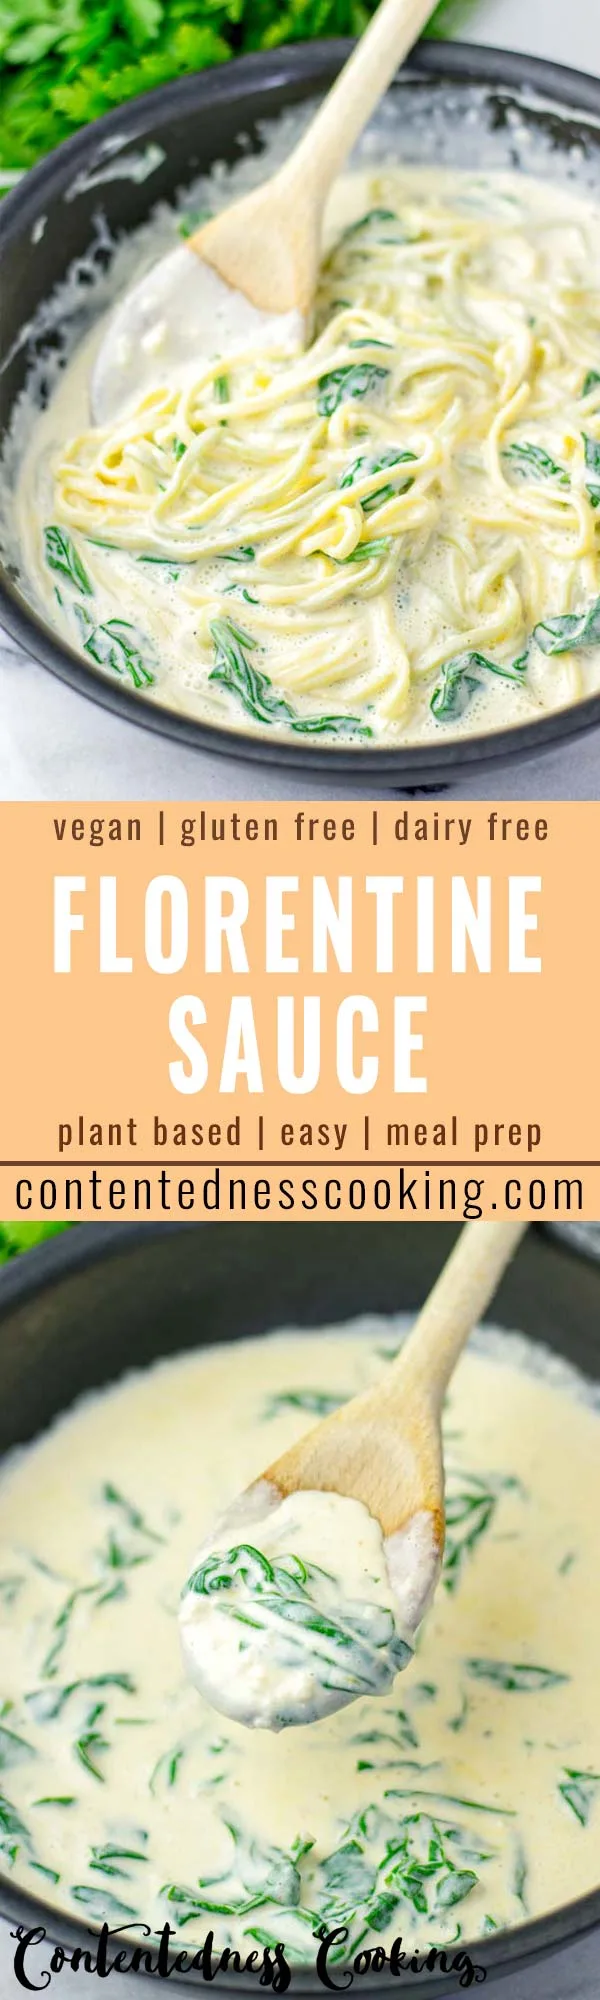 Super creamy and easy to make Florentine sauce is so delicious for dinner, lunch, meal prep, over pasta, rice, potatoes, veggies so yummy! No one would ever taste it is vegan and even gluten free. #vegan #dairyfree #glutenfree #vegetarian #cotentednesscooking #florentinesauce #dinner #lunch #worklunchideas #poultryseasoning #pastasauce #comfortfood #familydinners #onepotmeals 